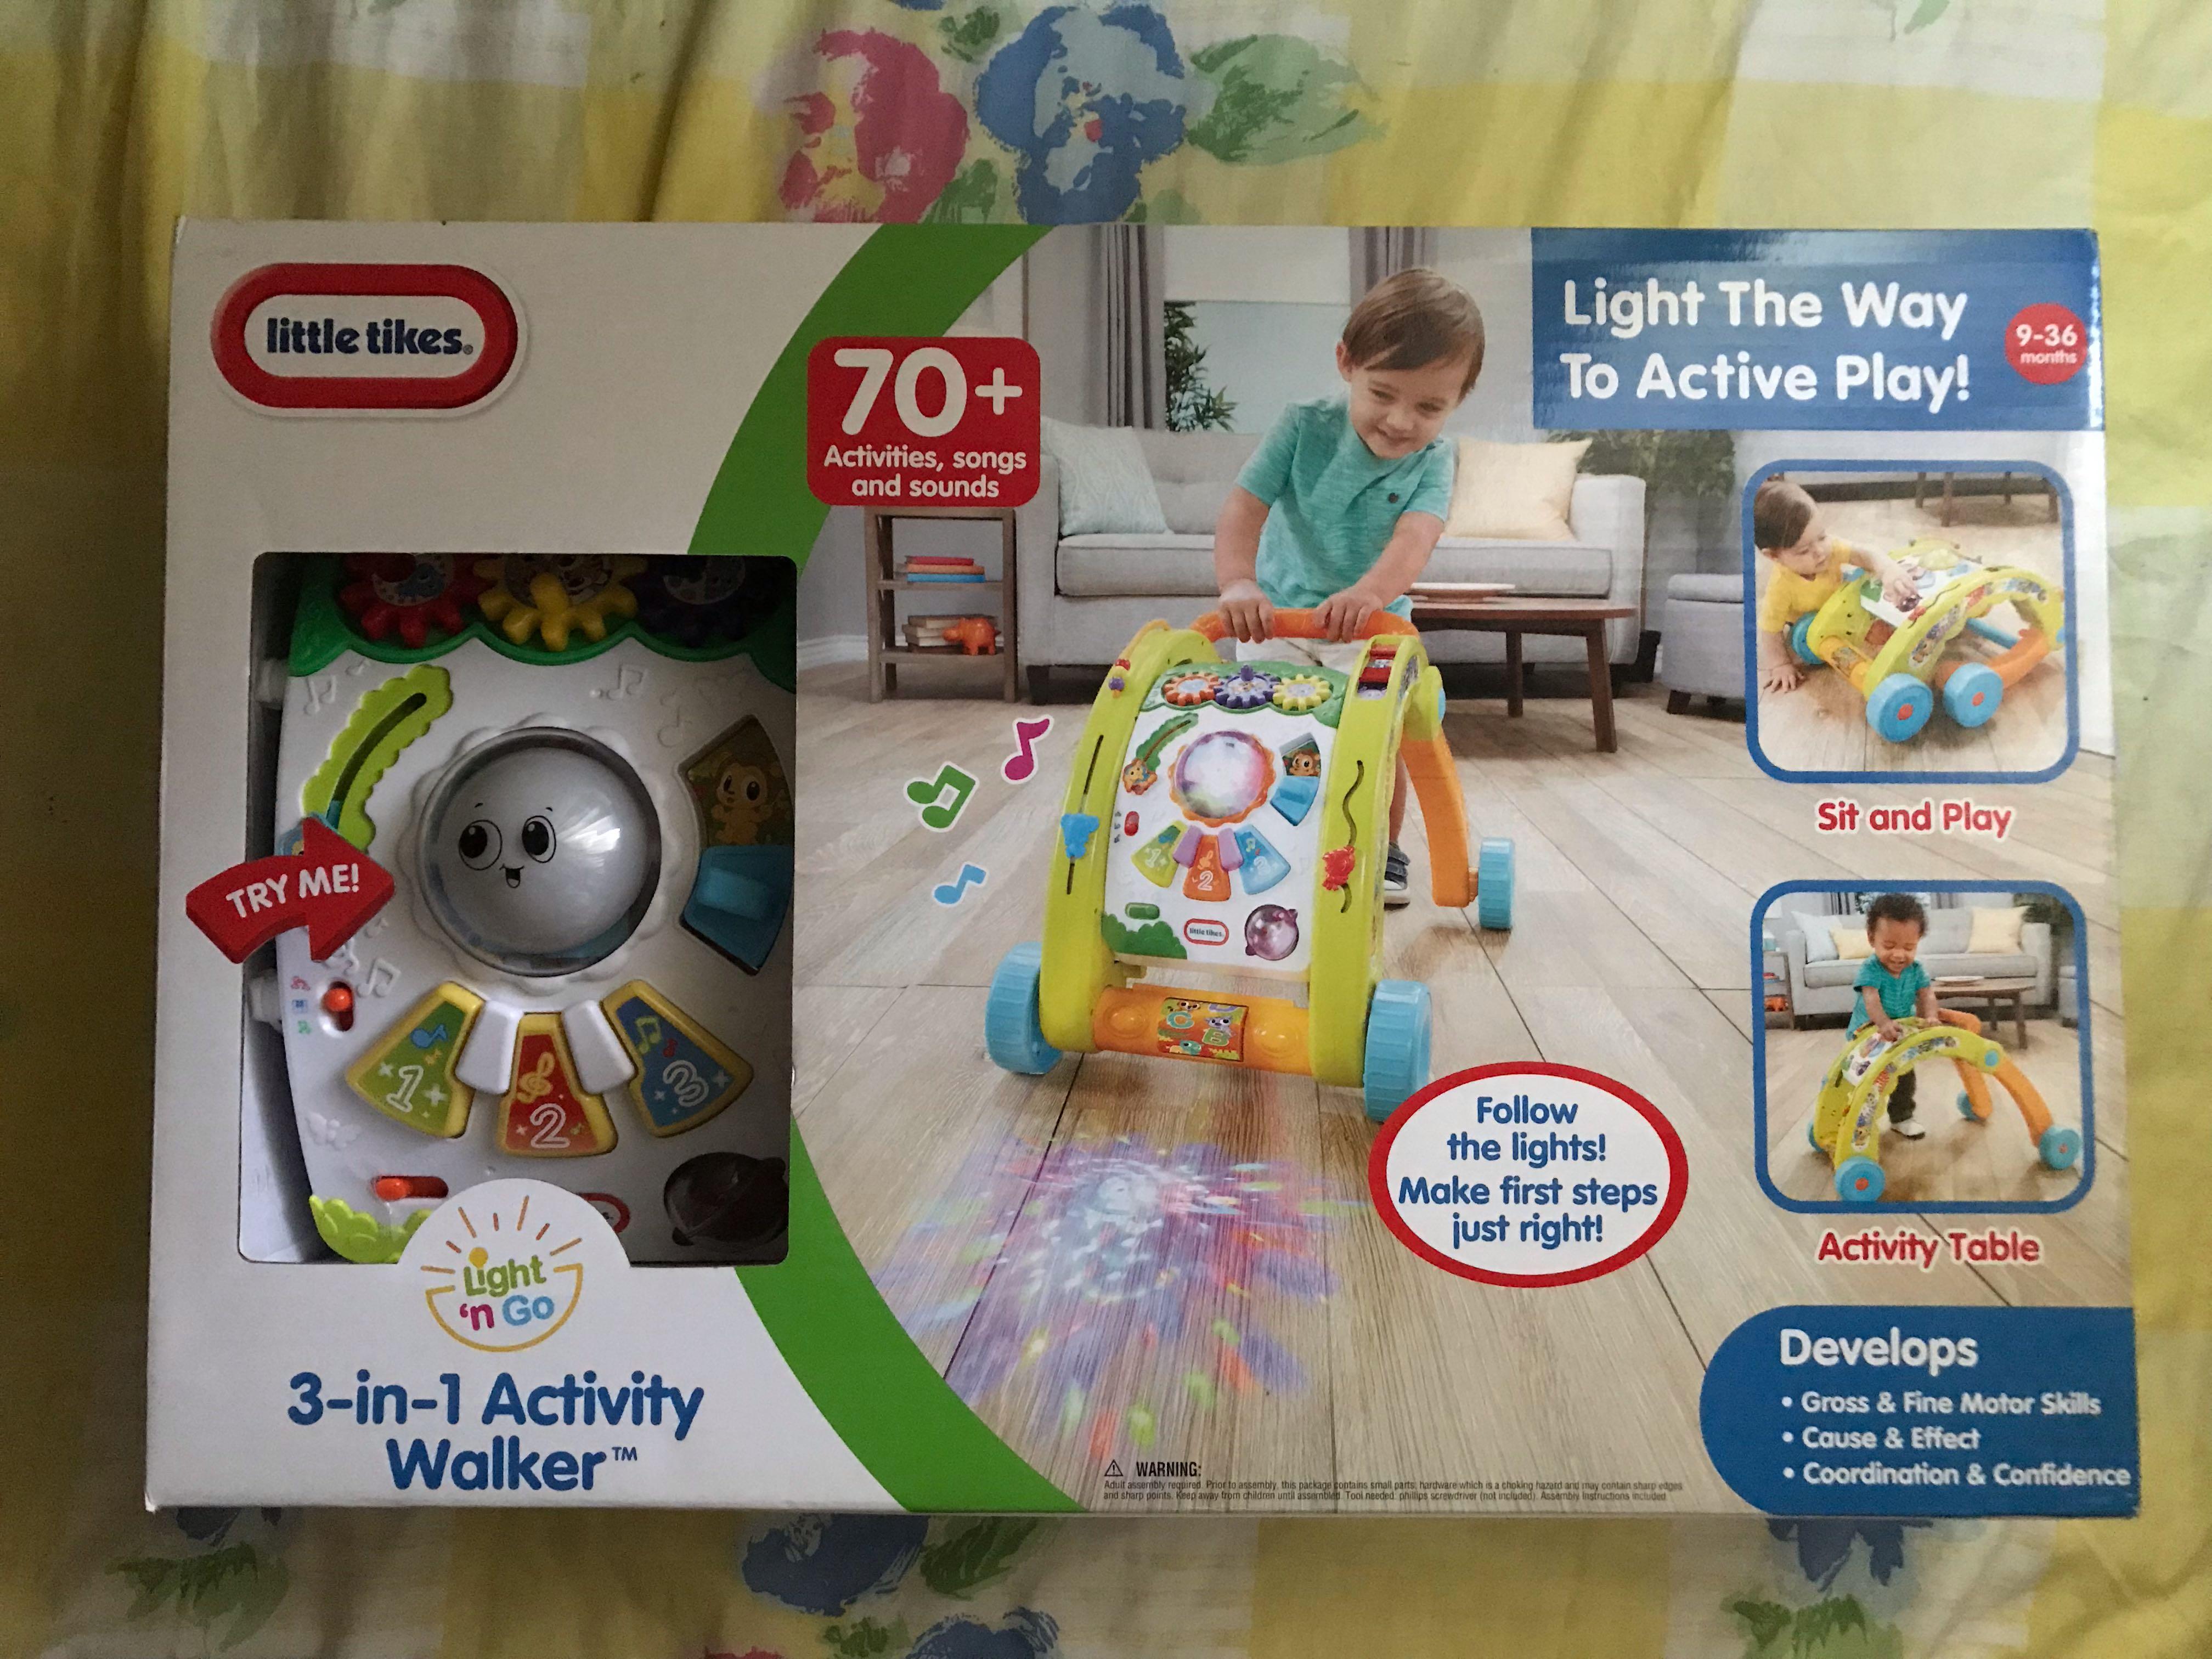 little tikes light the way to active play